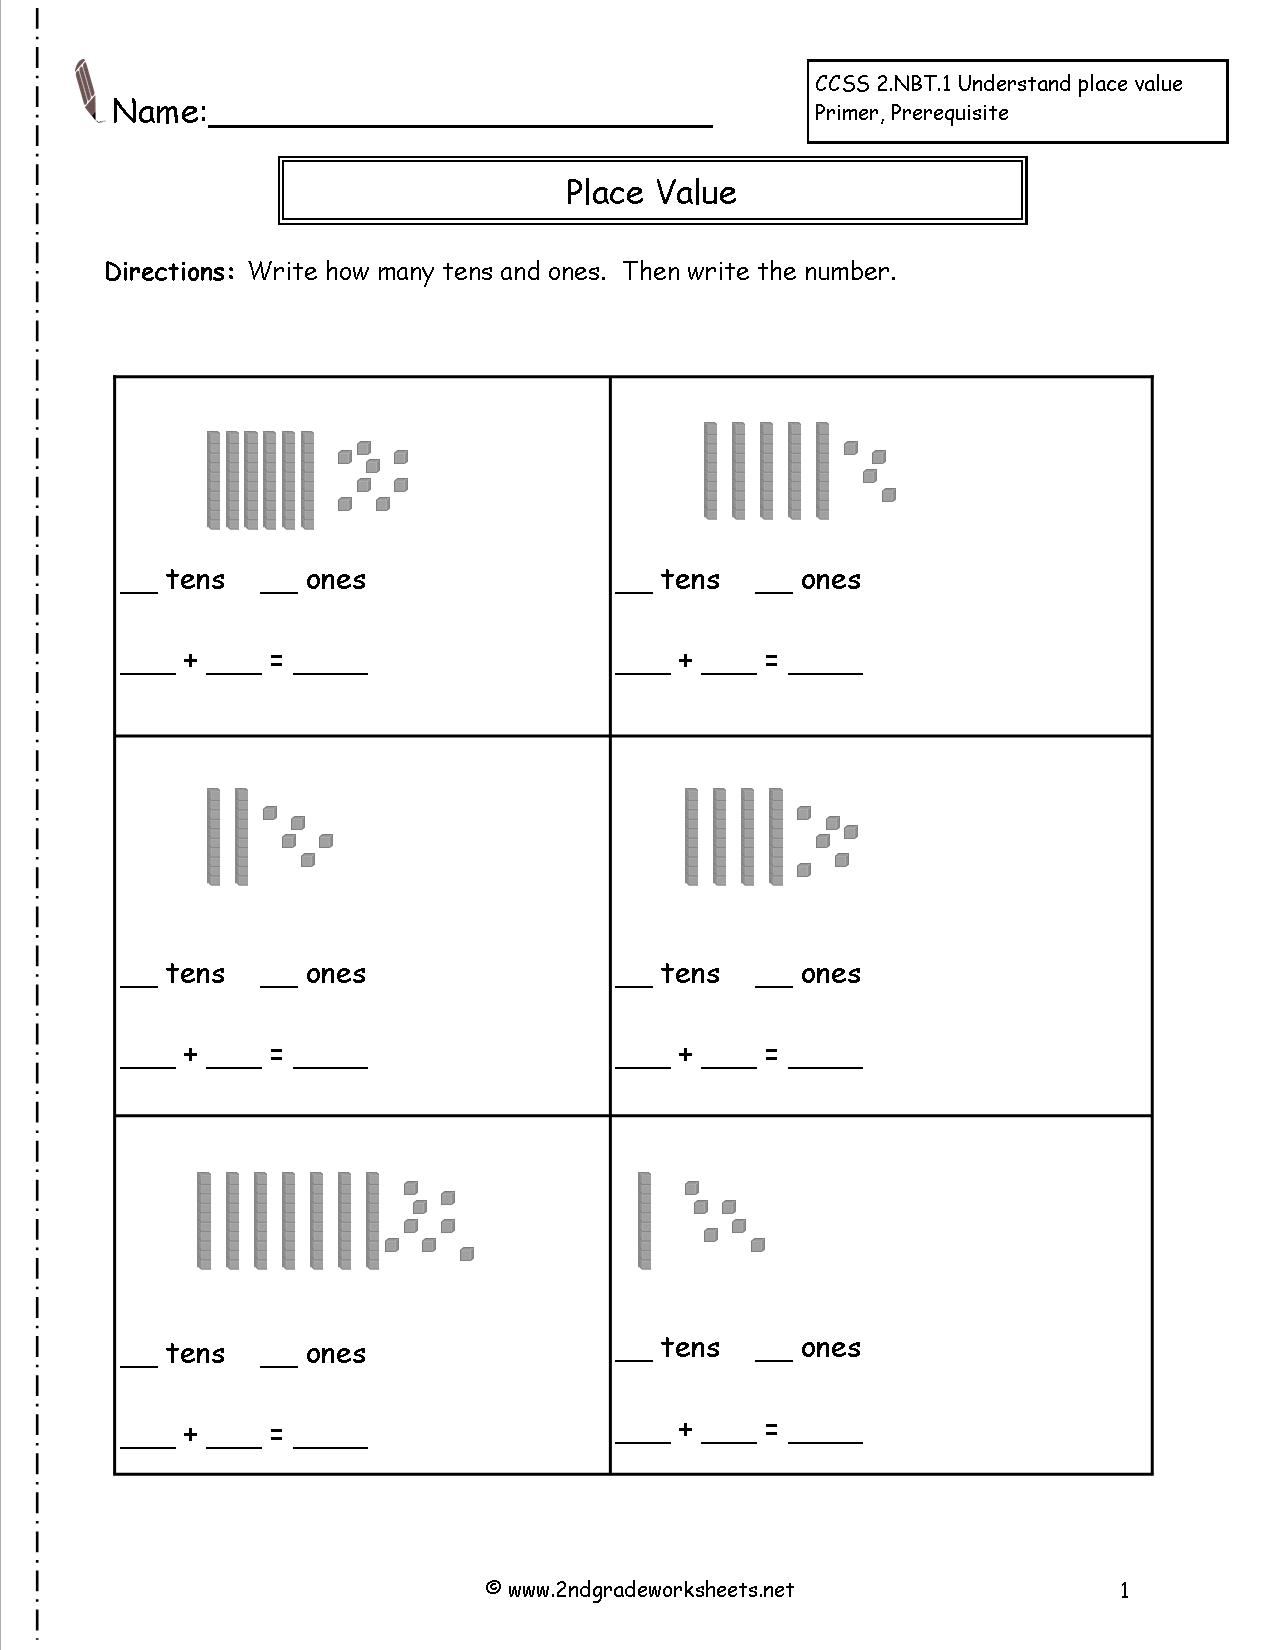 Second Grade Place Value Worksheets - Free Printable Place Value Worksheets